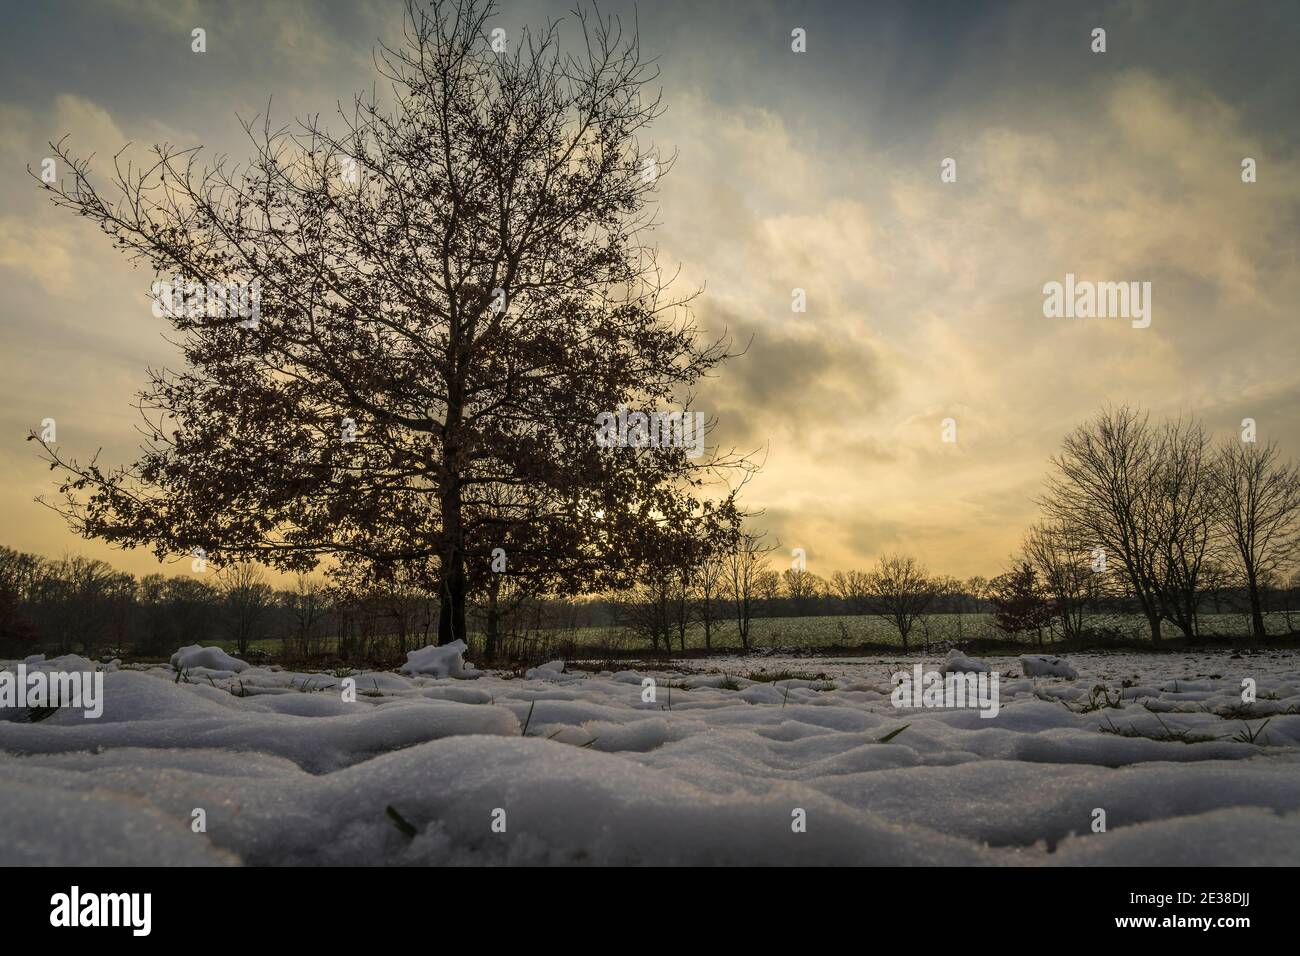 evening sky over a snowy field Stock Photo